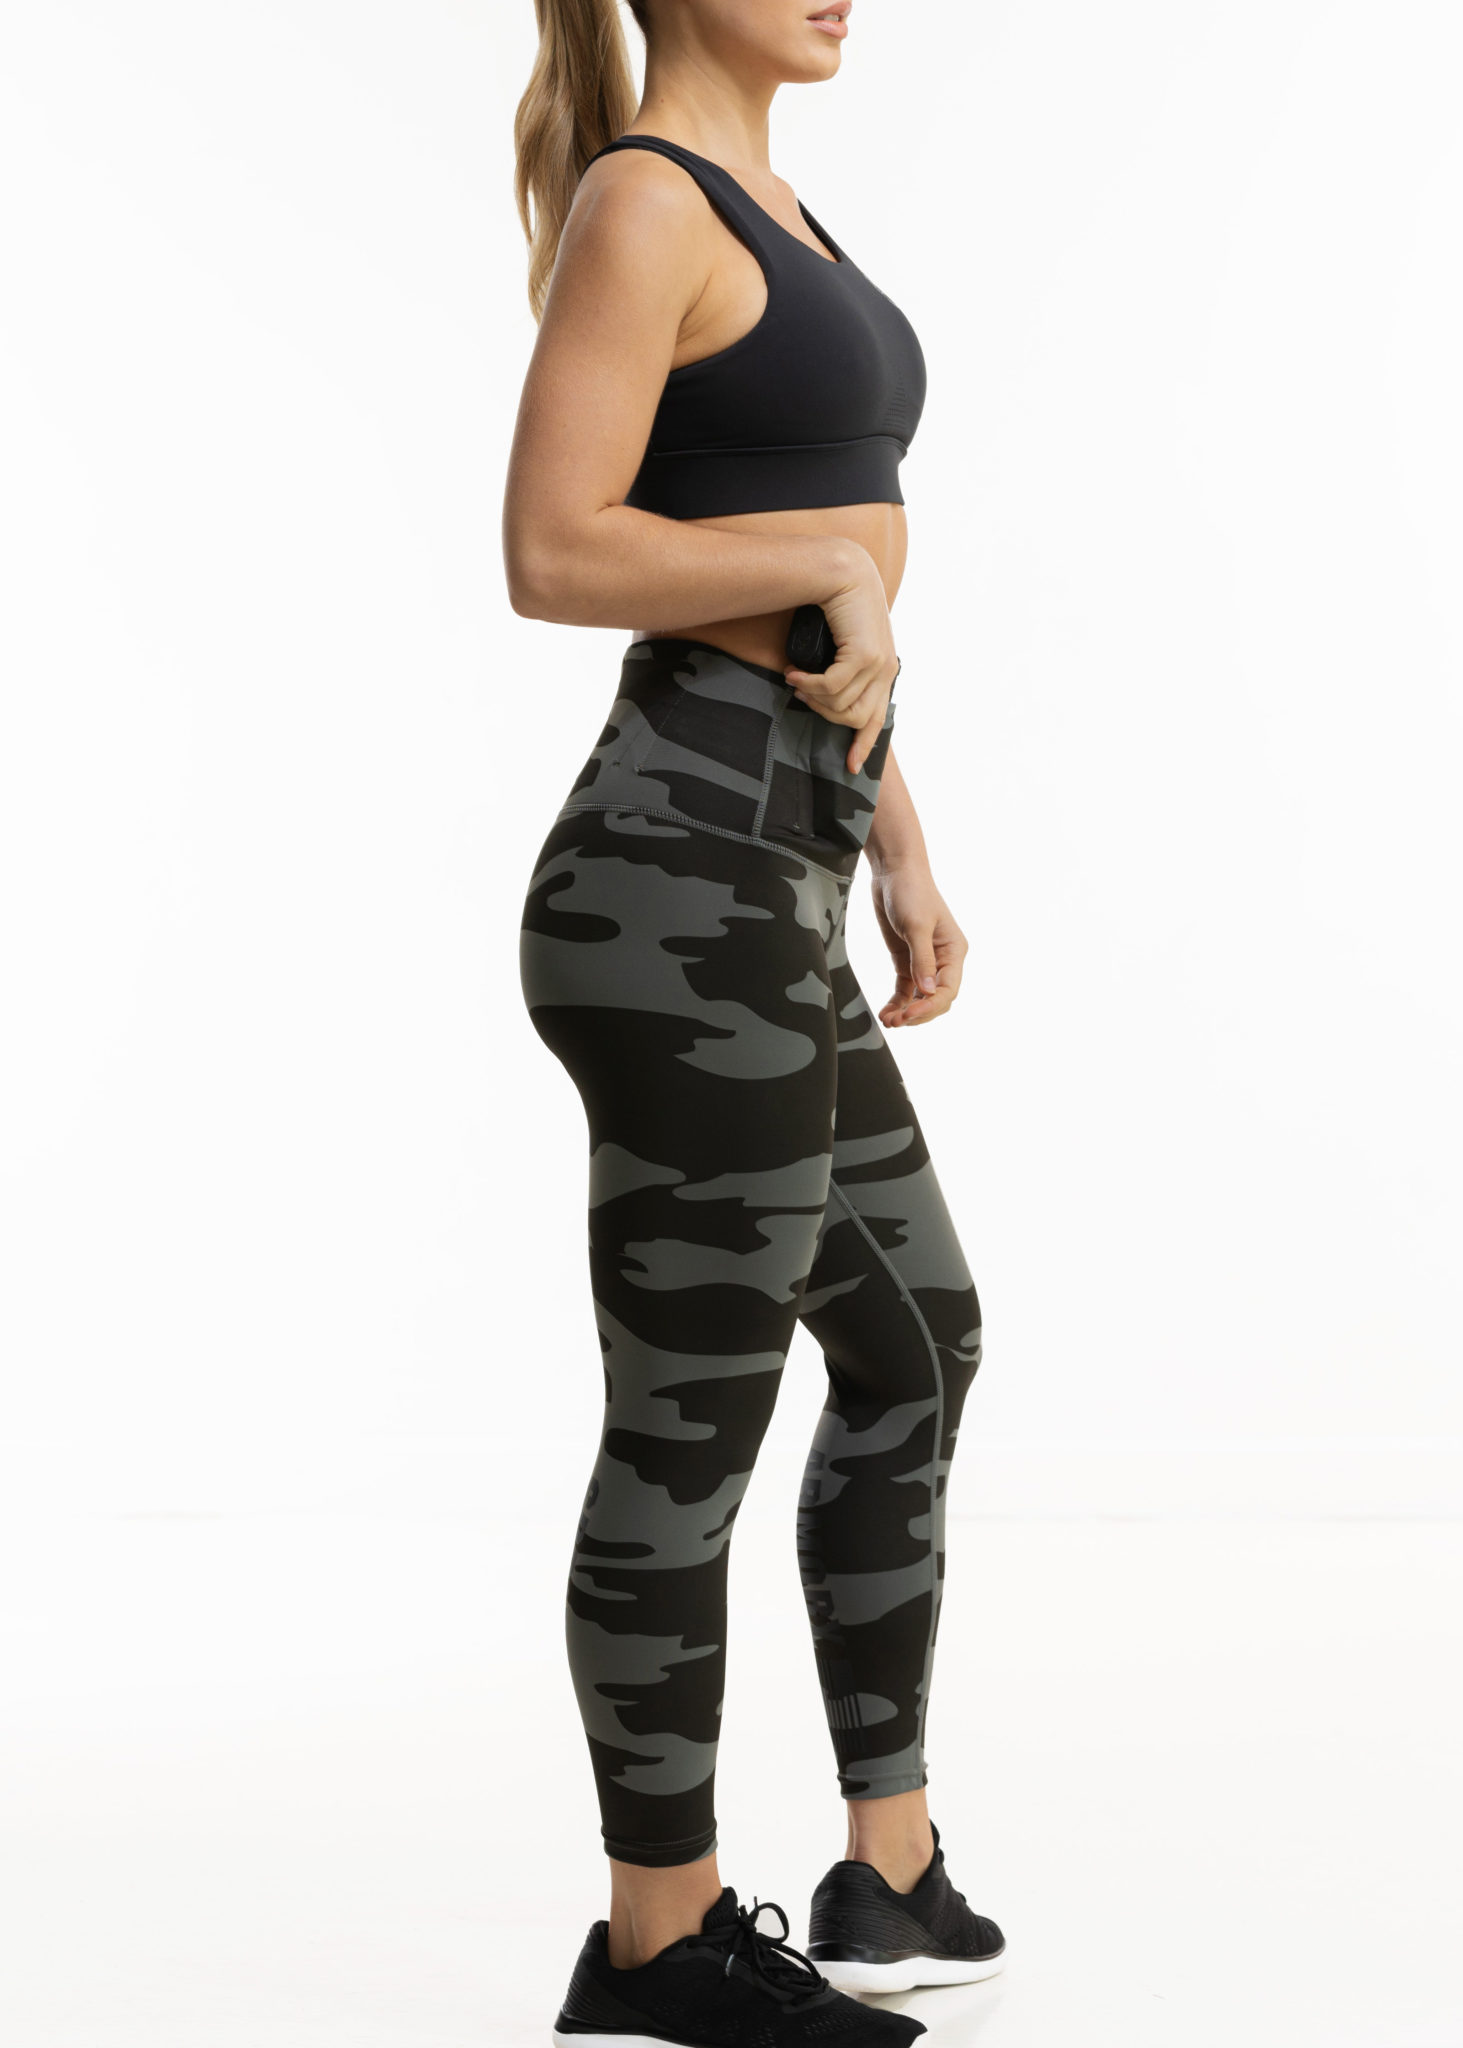 Lululemon Women's Black Camo Leggings with pockets Size 8 - $35 (68% Off  Retail) - From Alexandria